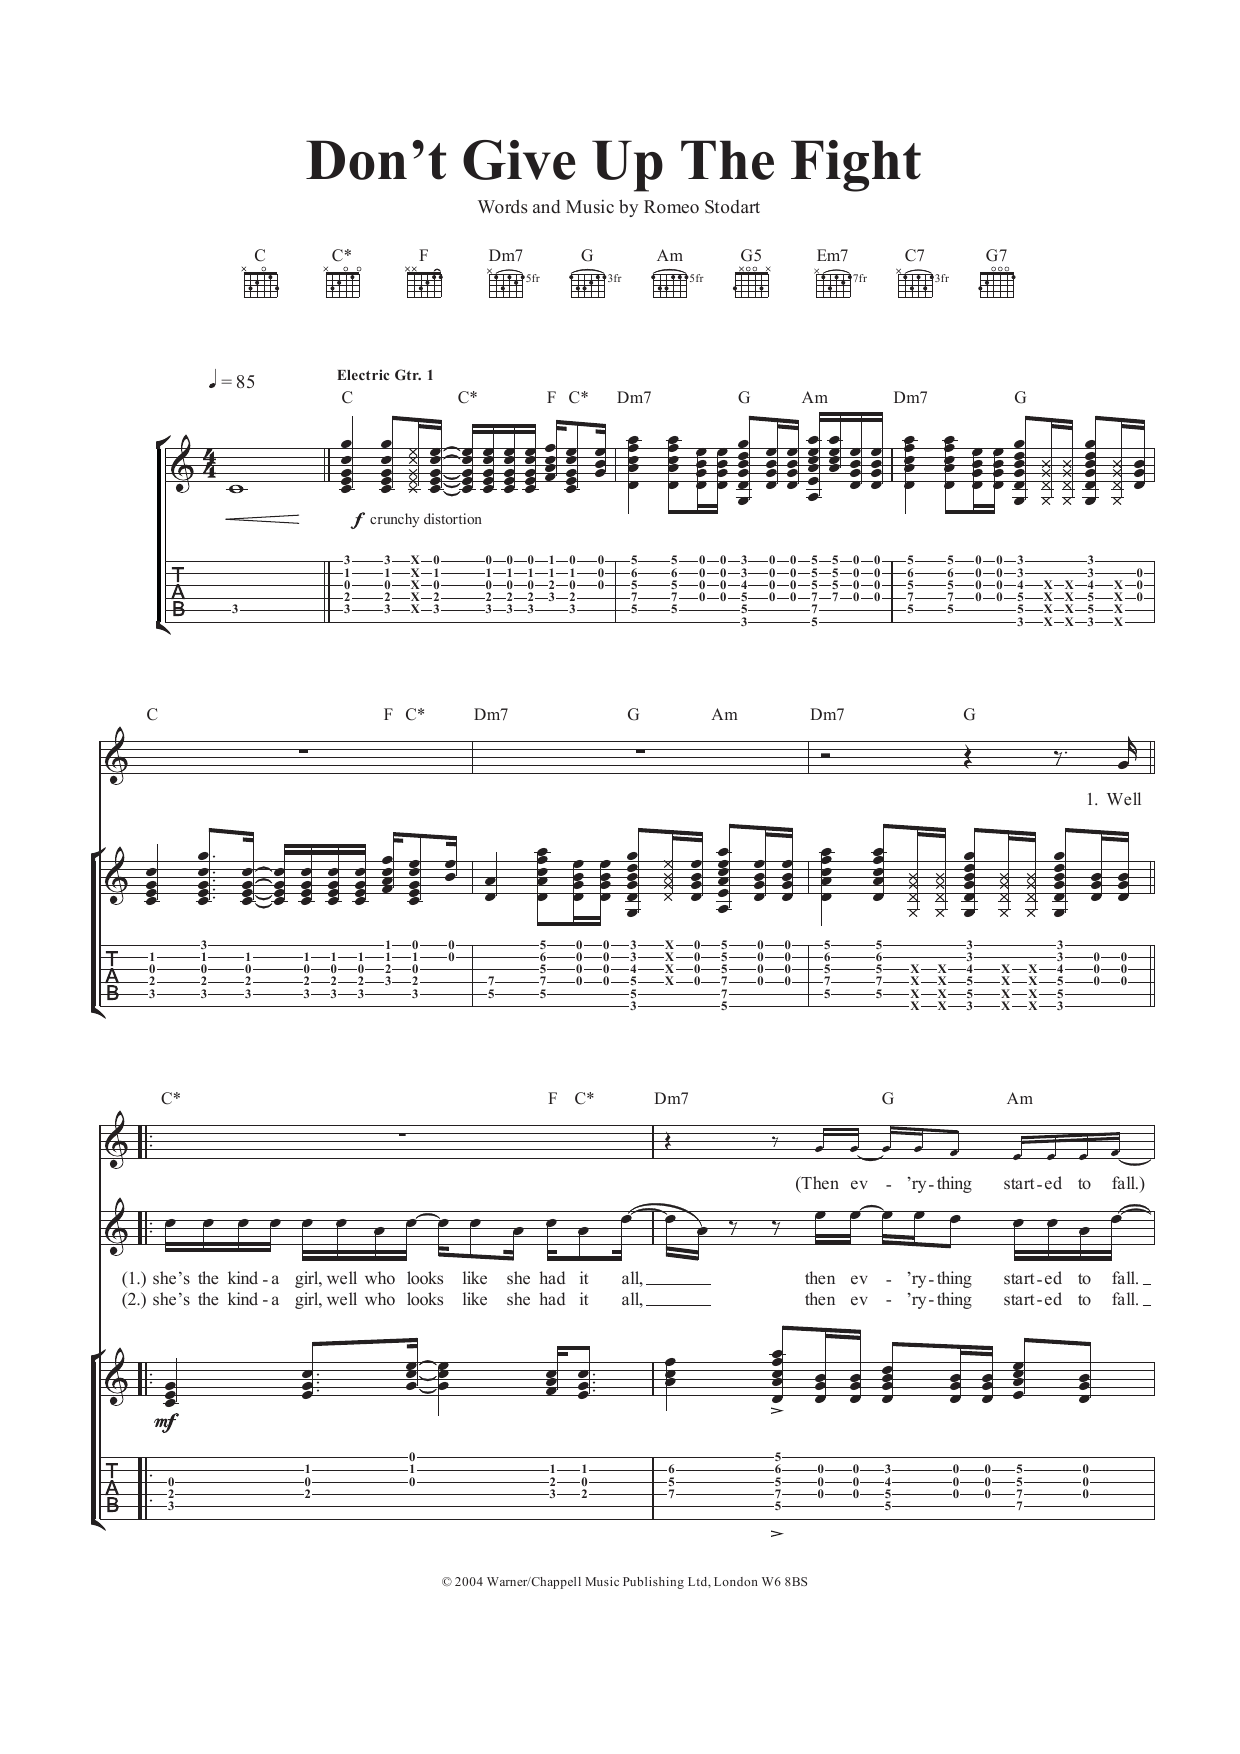 Download The Magic Numbers Don't Give Up The Fight Sheet Music